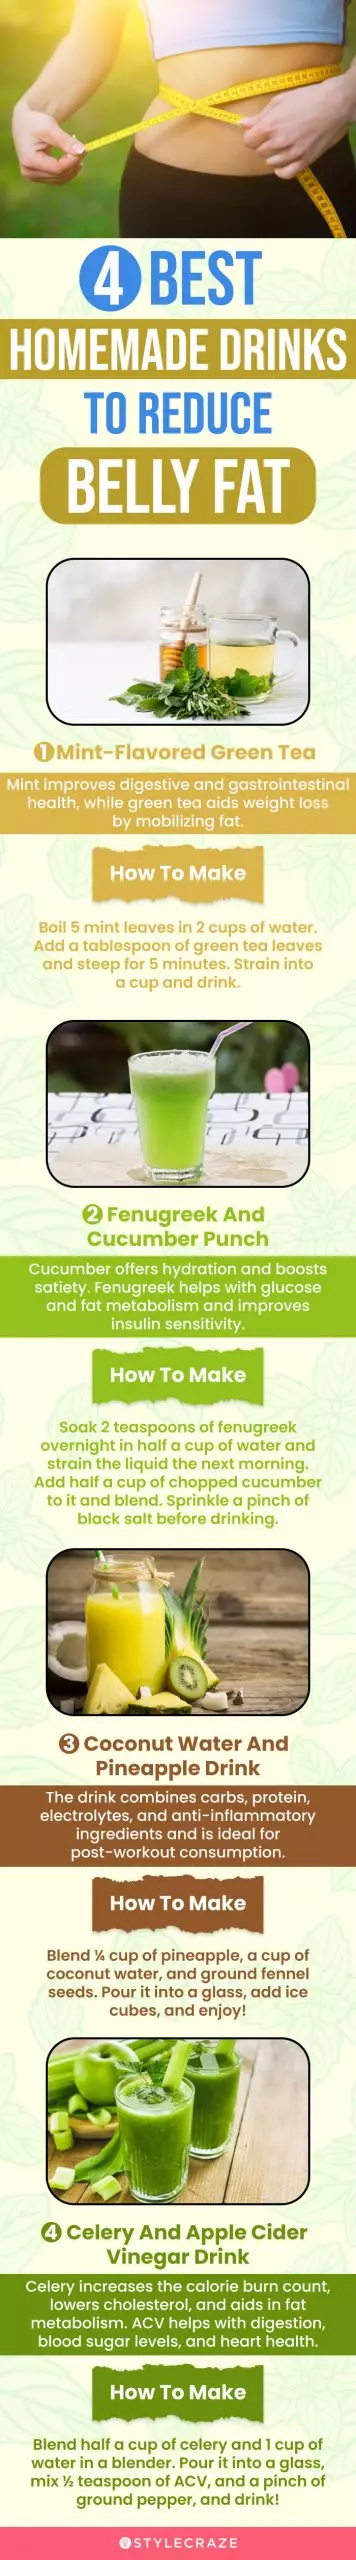 4 best homemade drinks to reduce belly fat (infographic)